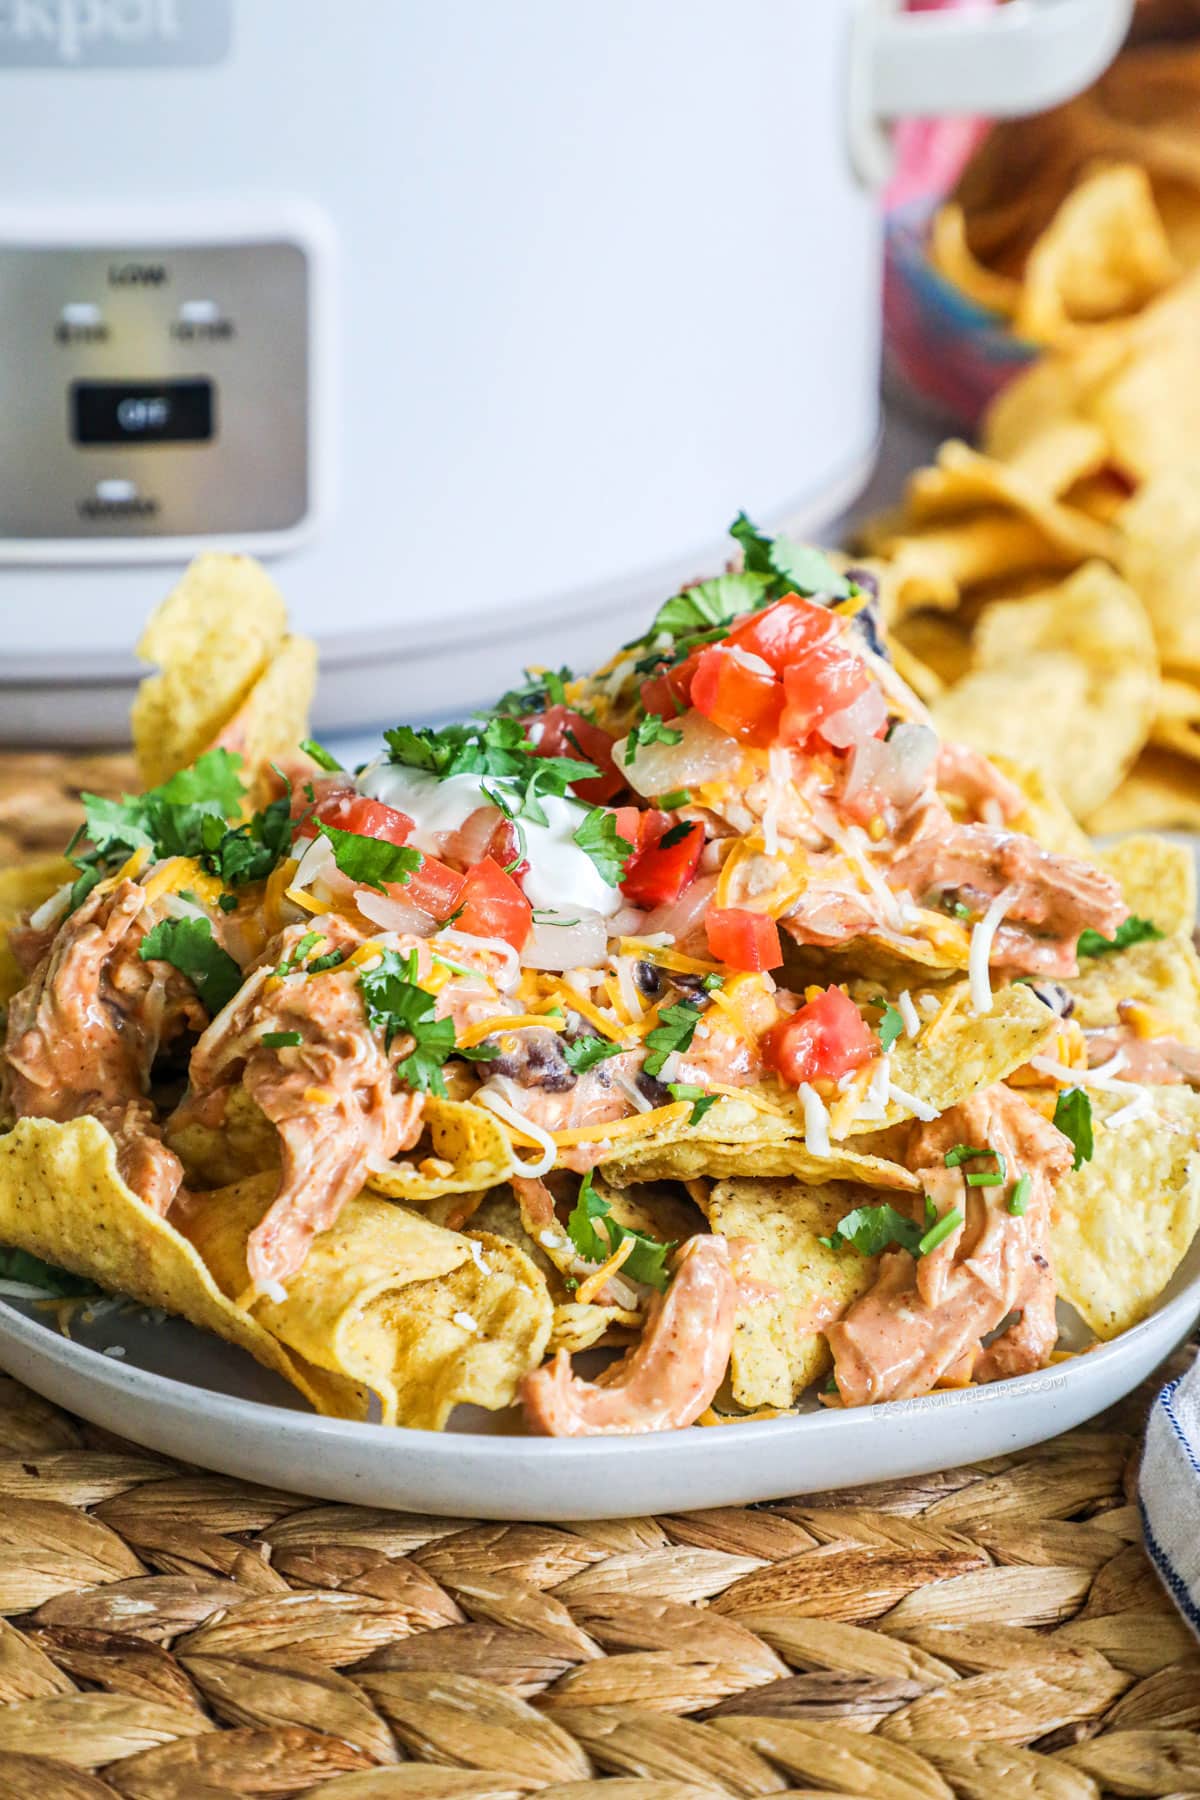 Plate of Crockpot chicken nachos sitting in front of the slow cooker.